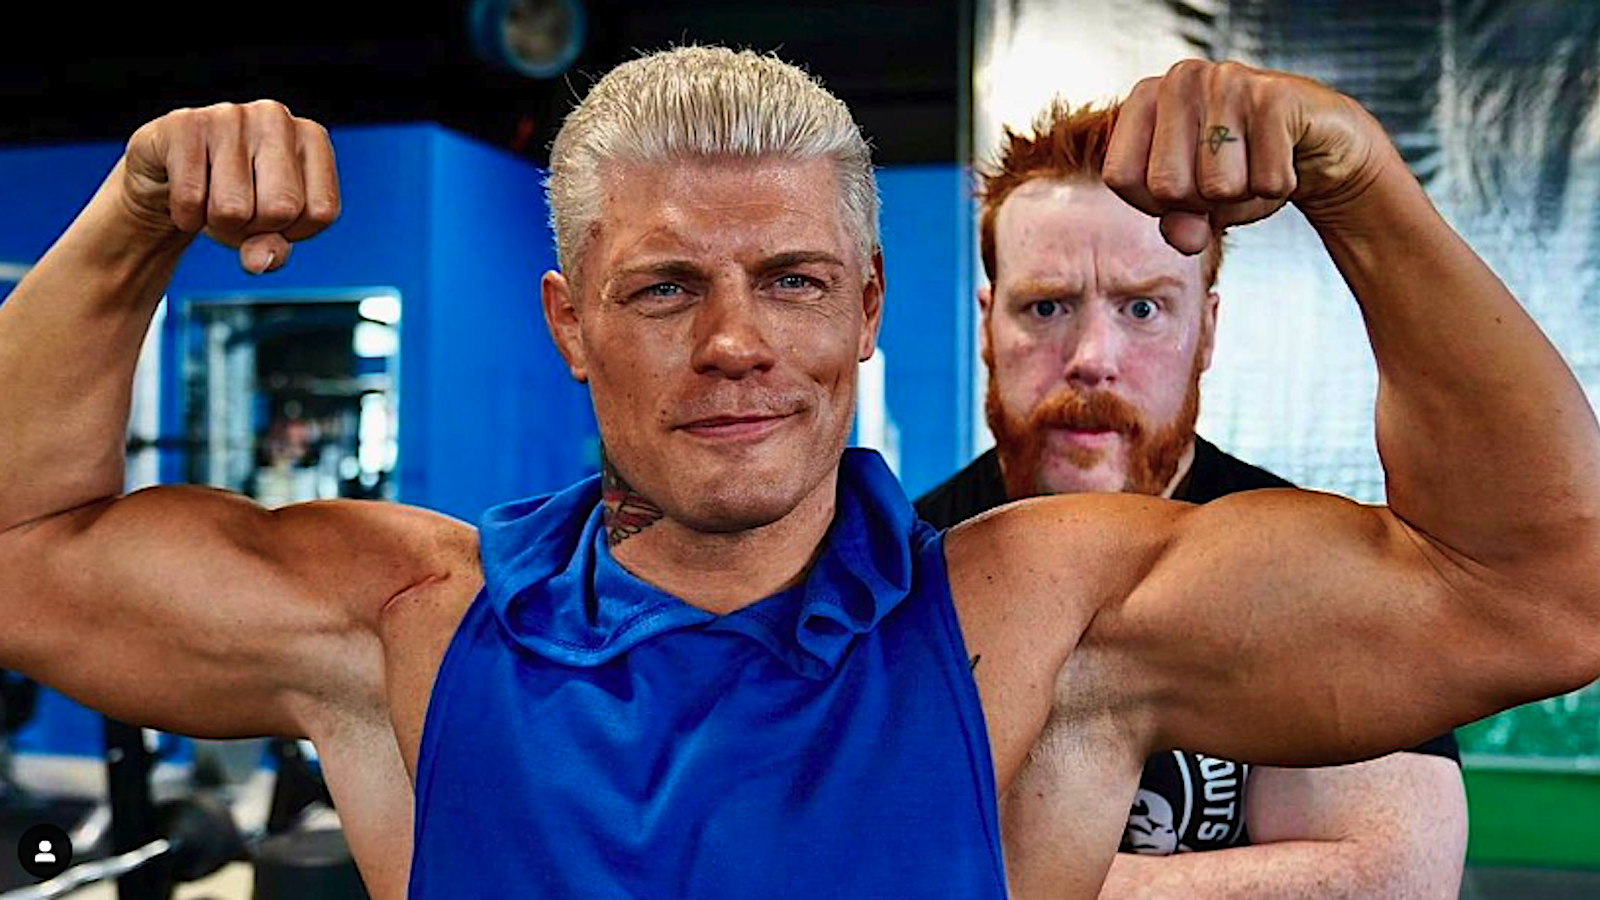 WrestleMania Ready — WWE's Cody Rhodes and Sheamus' Full Body Supersets  Workout | BarBend